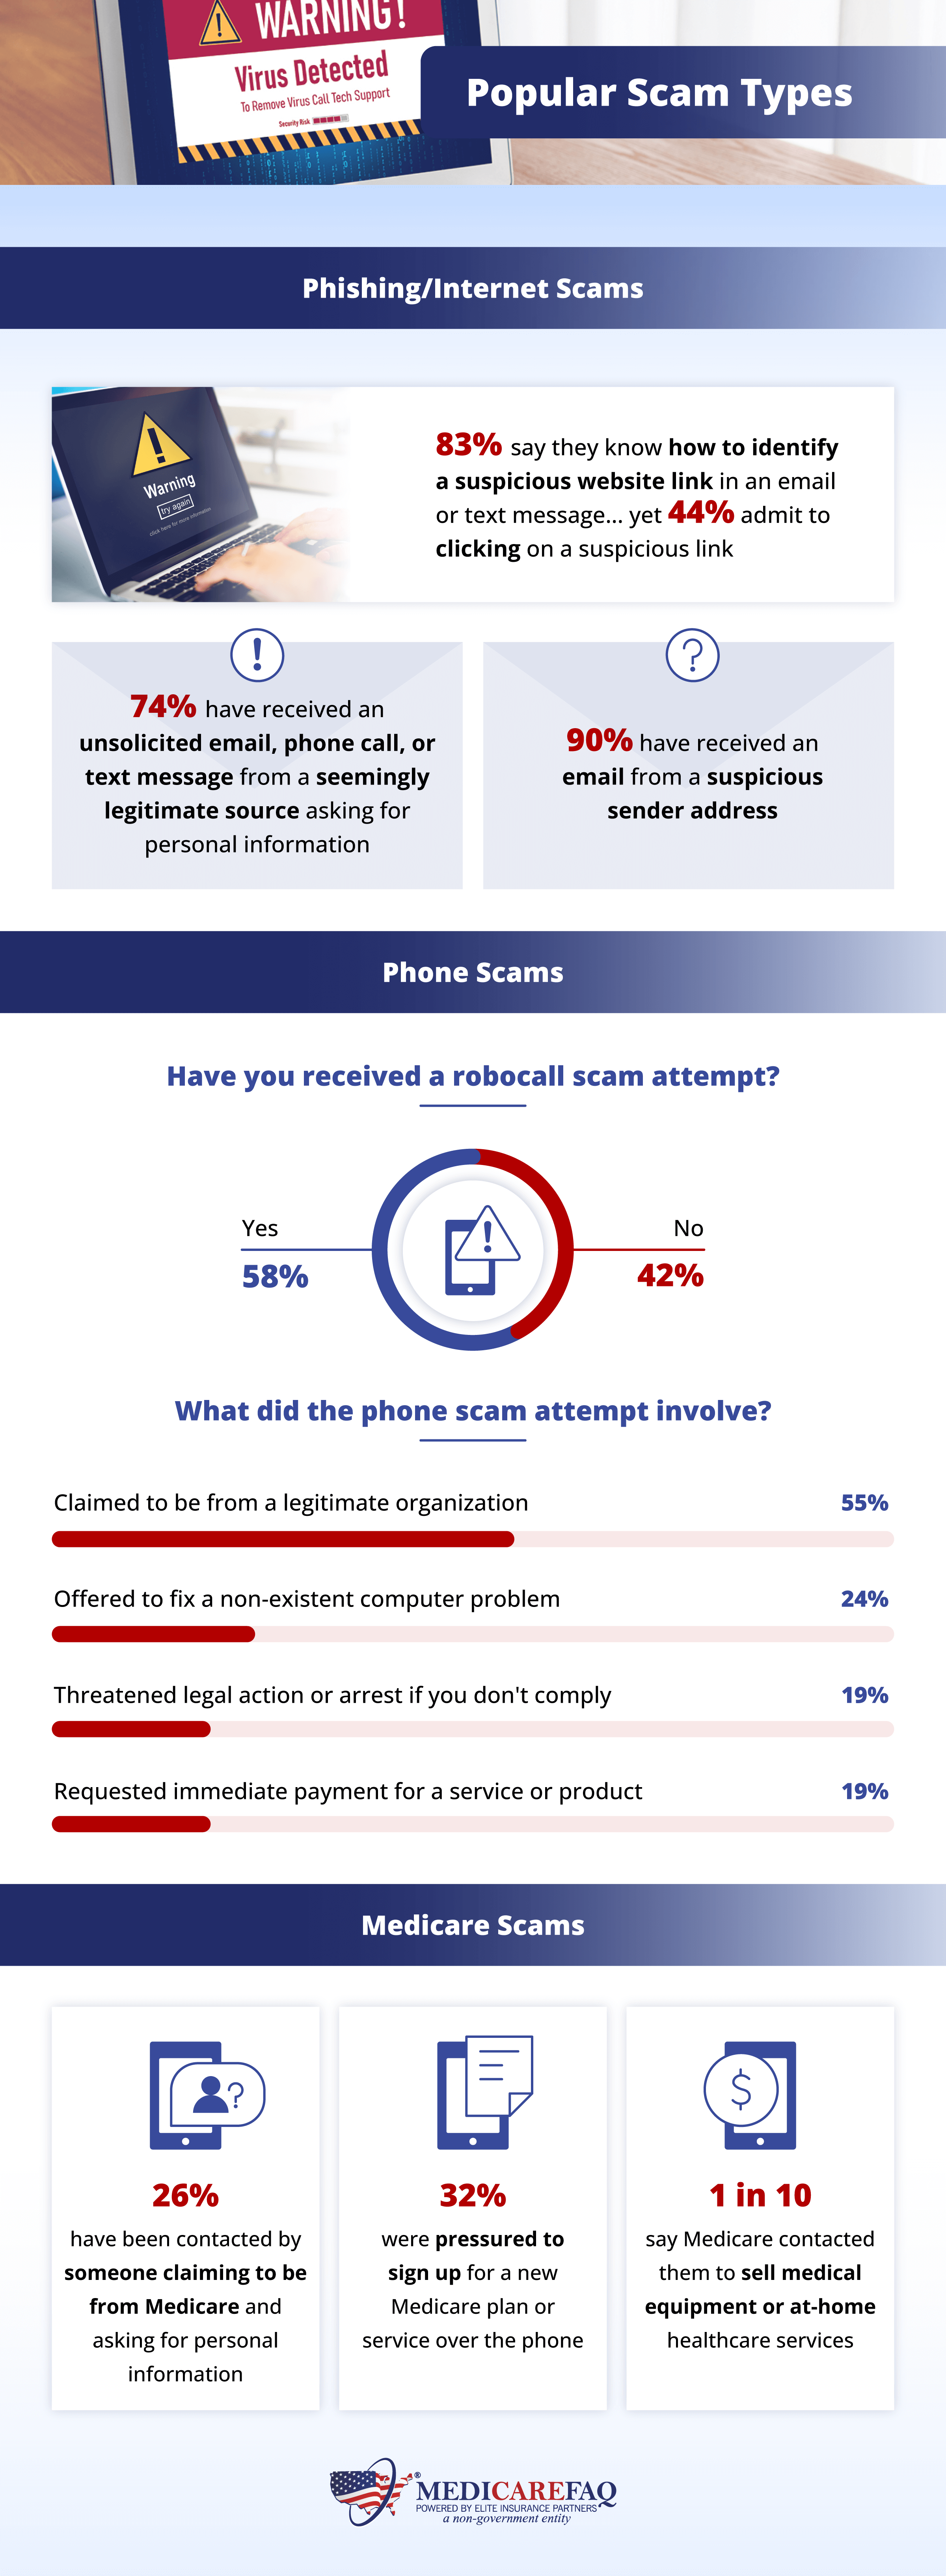 Seniors’ experience with popular scam types and how they’ve been contacted - study from MedicareFAQ.com